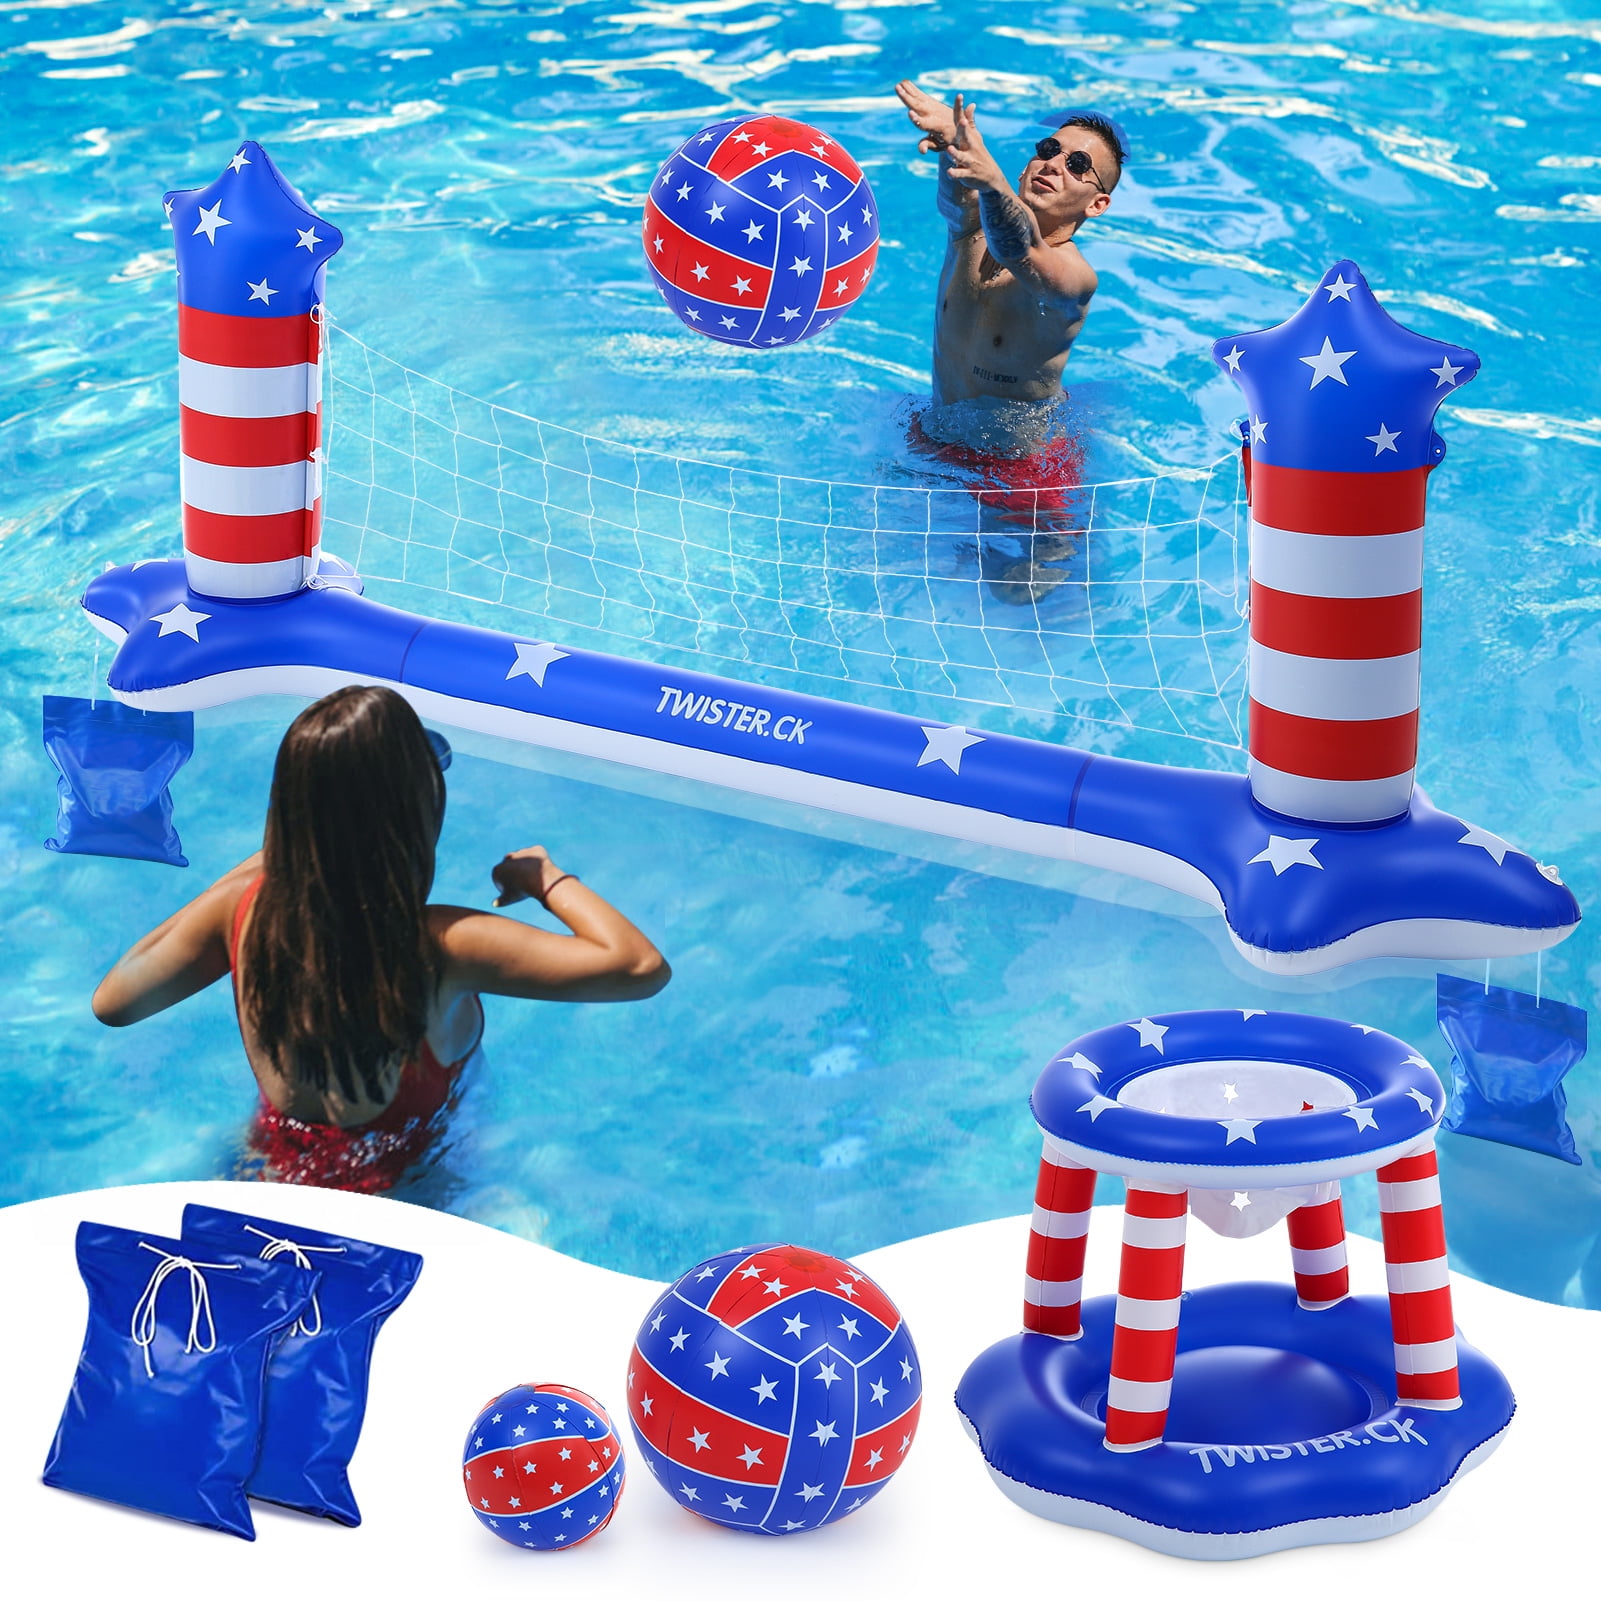 H20GO Swimming Pool Inflatable Play Game Set Basketball & Rings Water Toy Age 3+ 